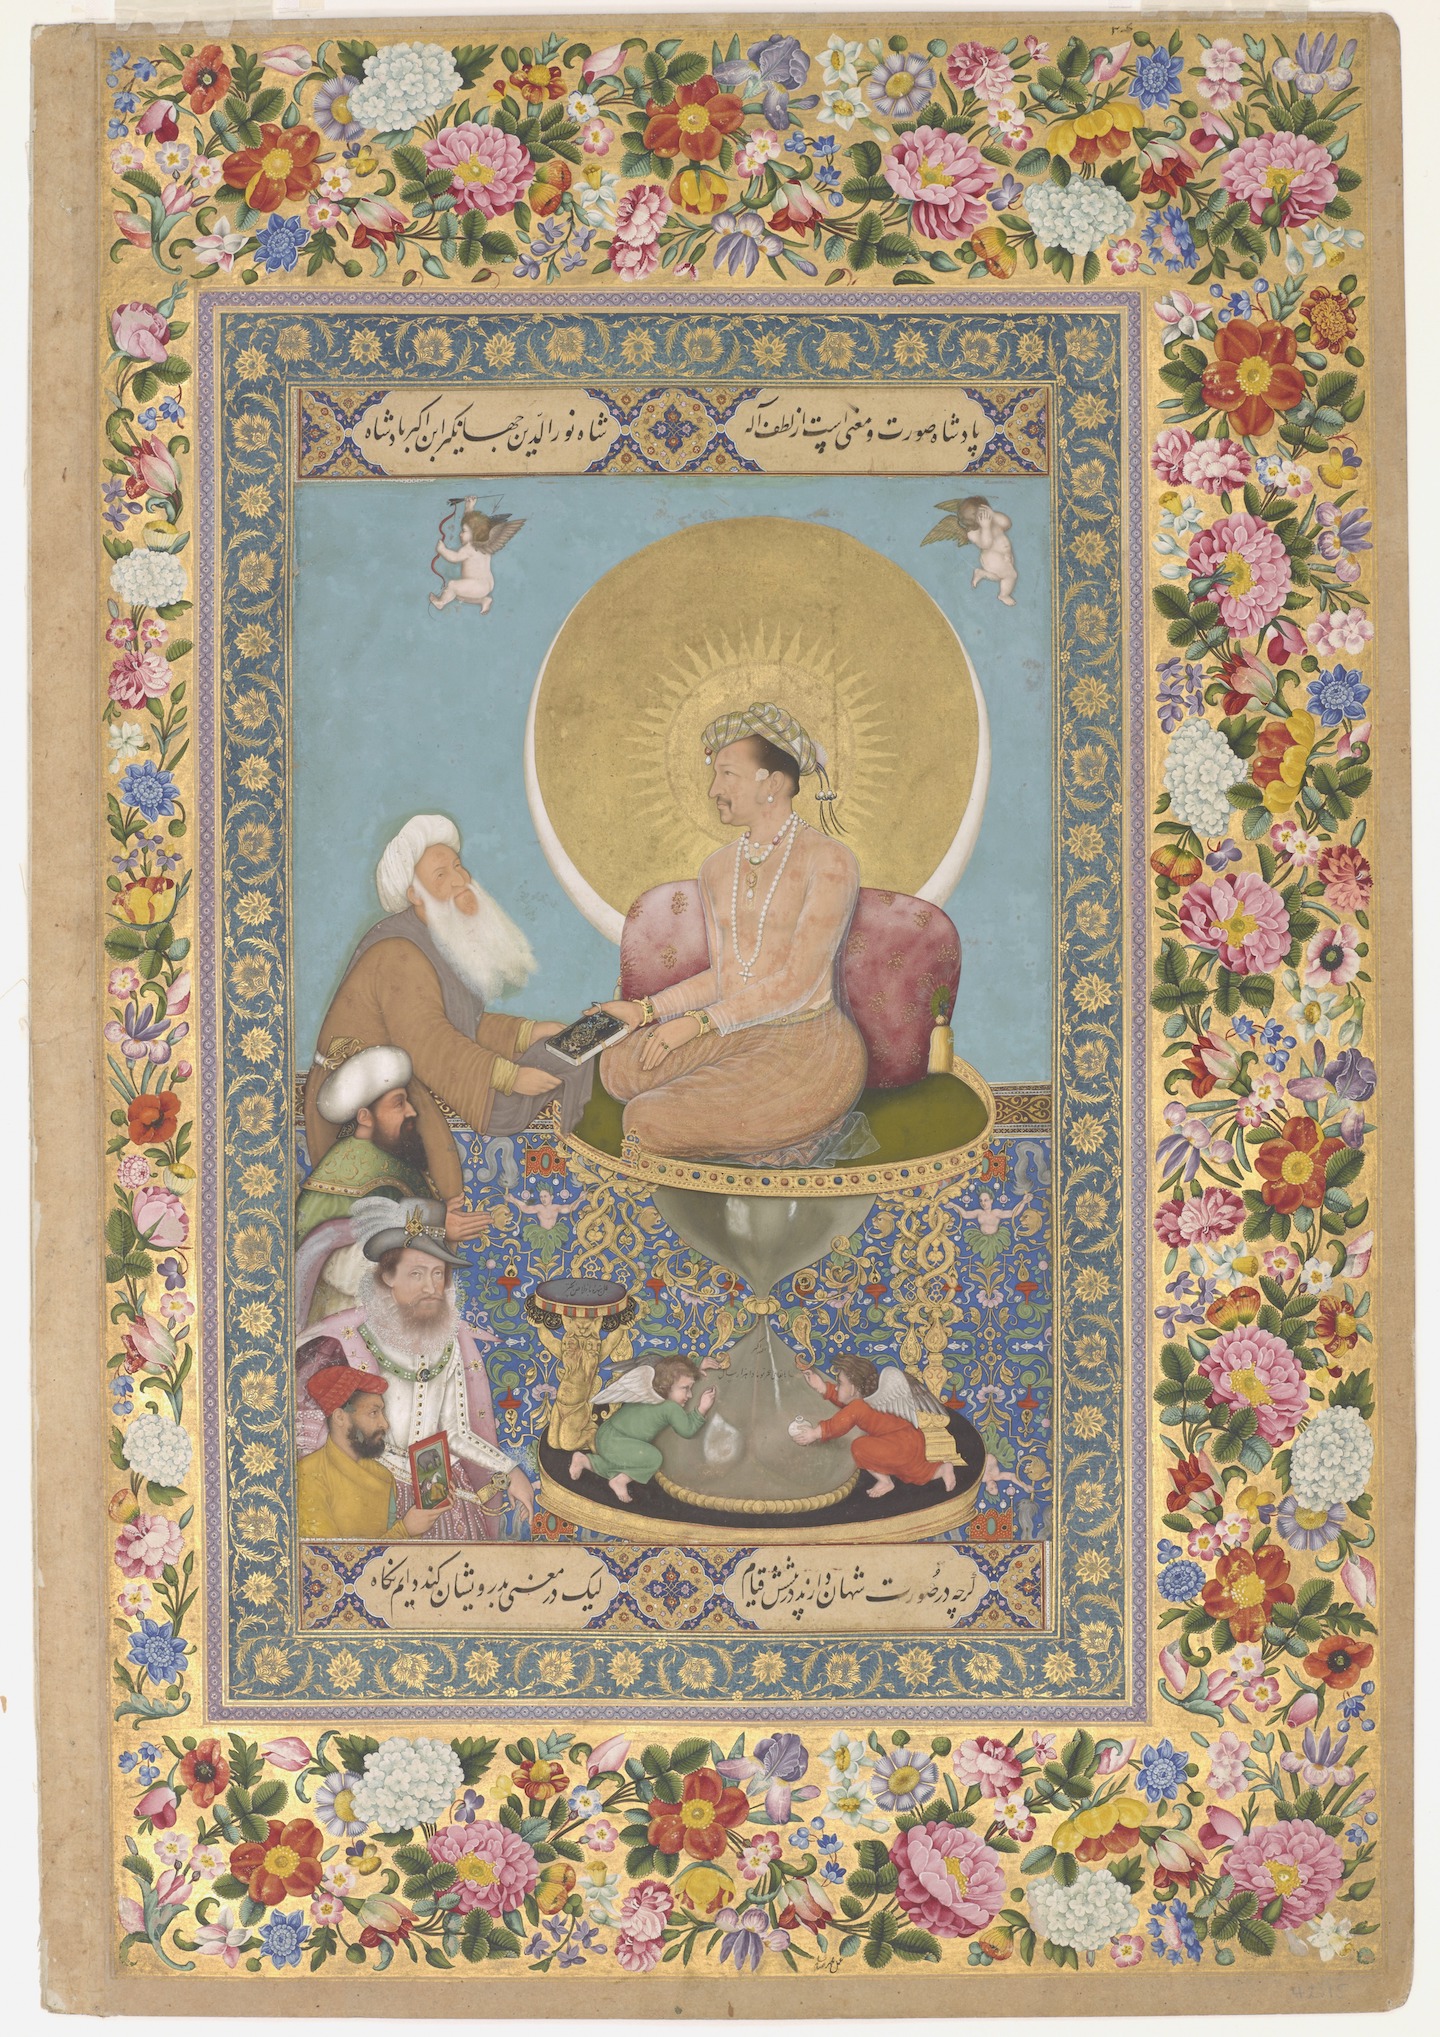 Bichitr, margins by Muhammad Sadiq, Jahangir Preferring a Sufi Shaikh to Kings from the "St. Petersburg Album," 1615–18, opaque watercolor, gold and ink on paper, 46.9 × 30.7 cm (Freer|Sackler: The Smithsonian's Museums of Asian Art)